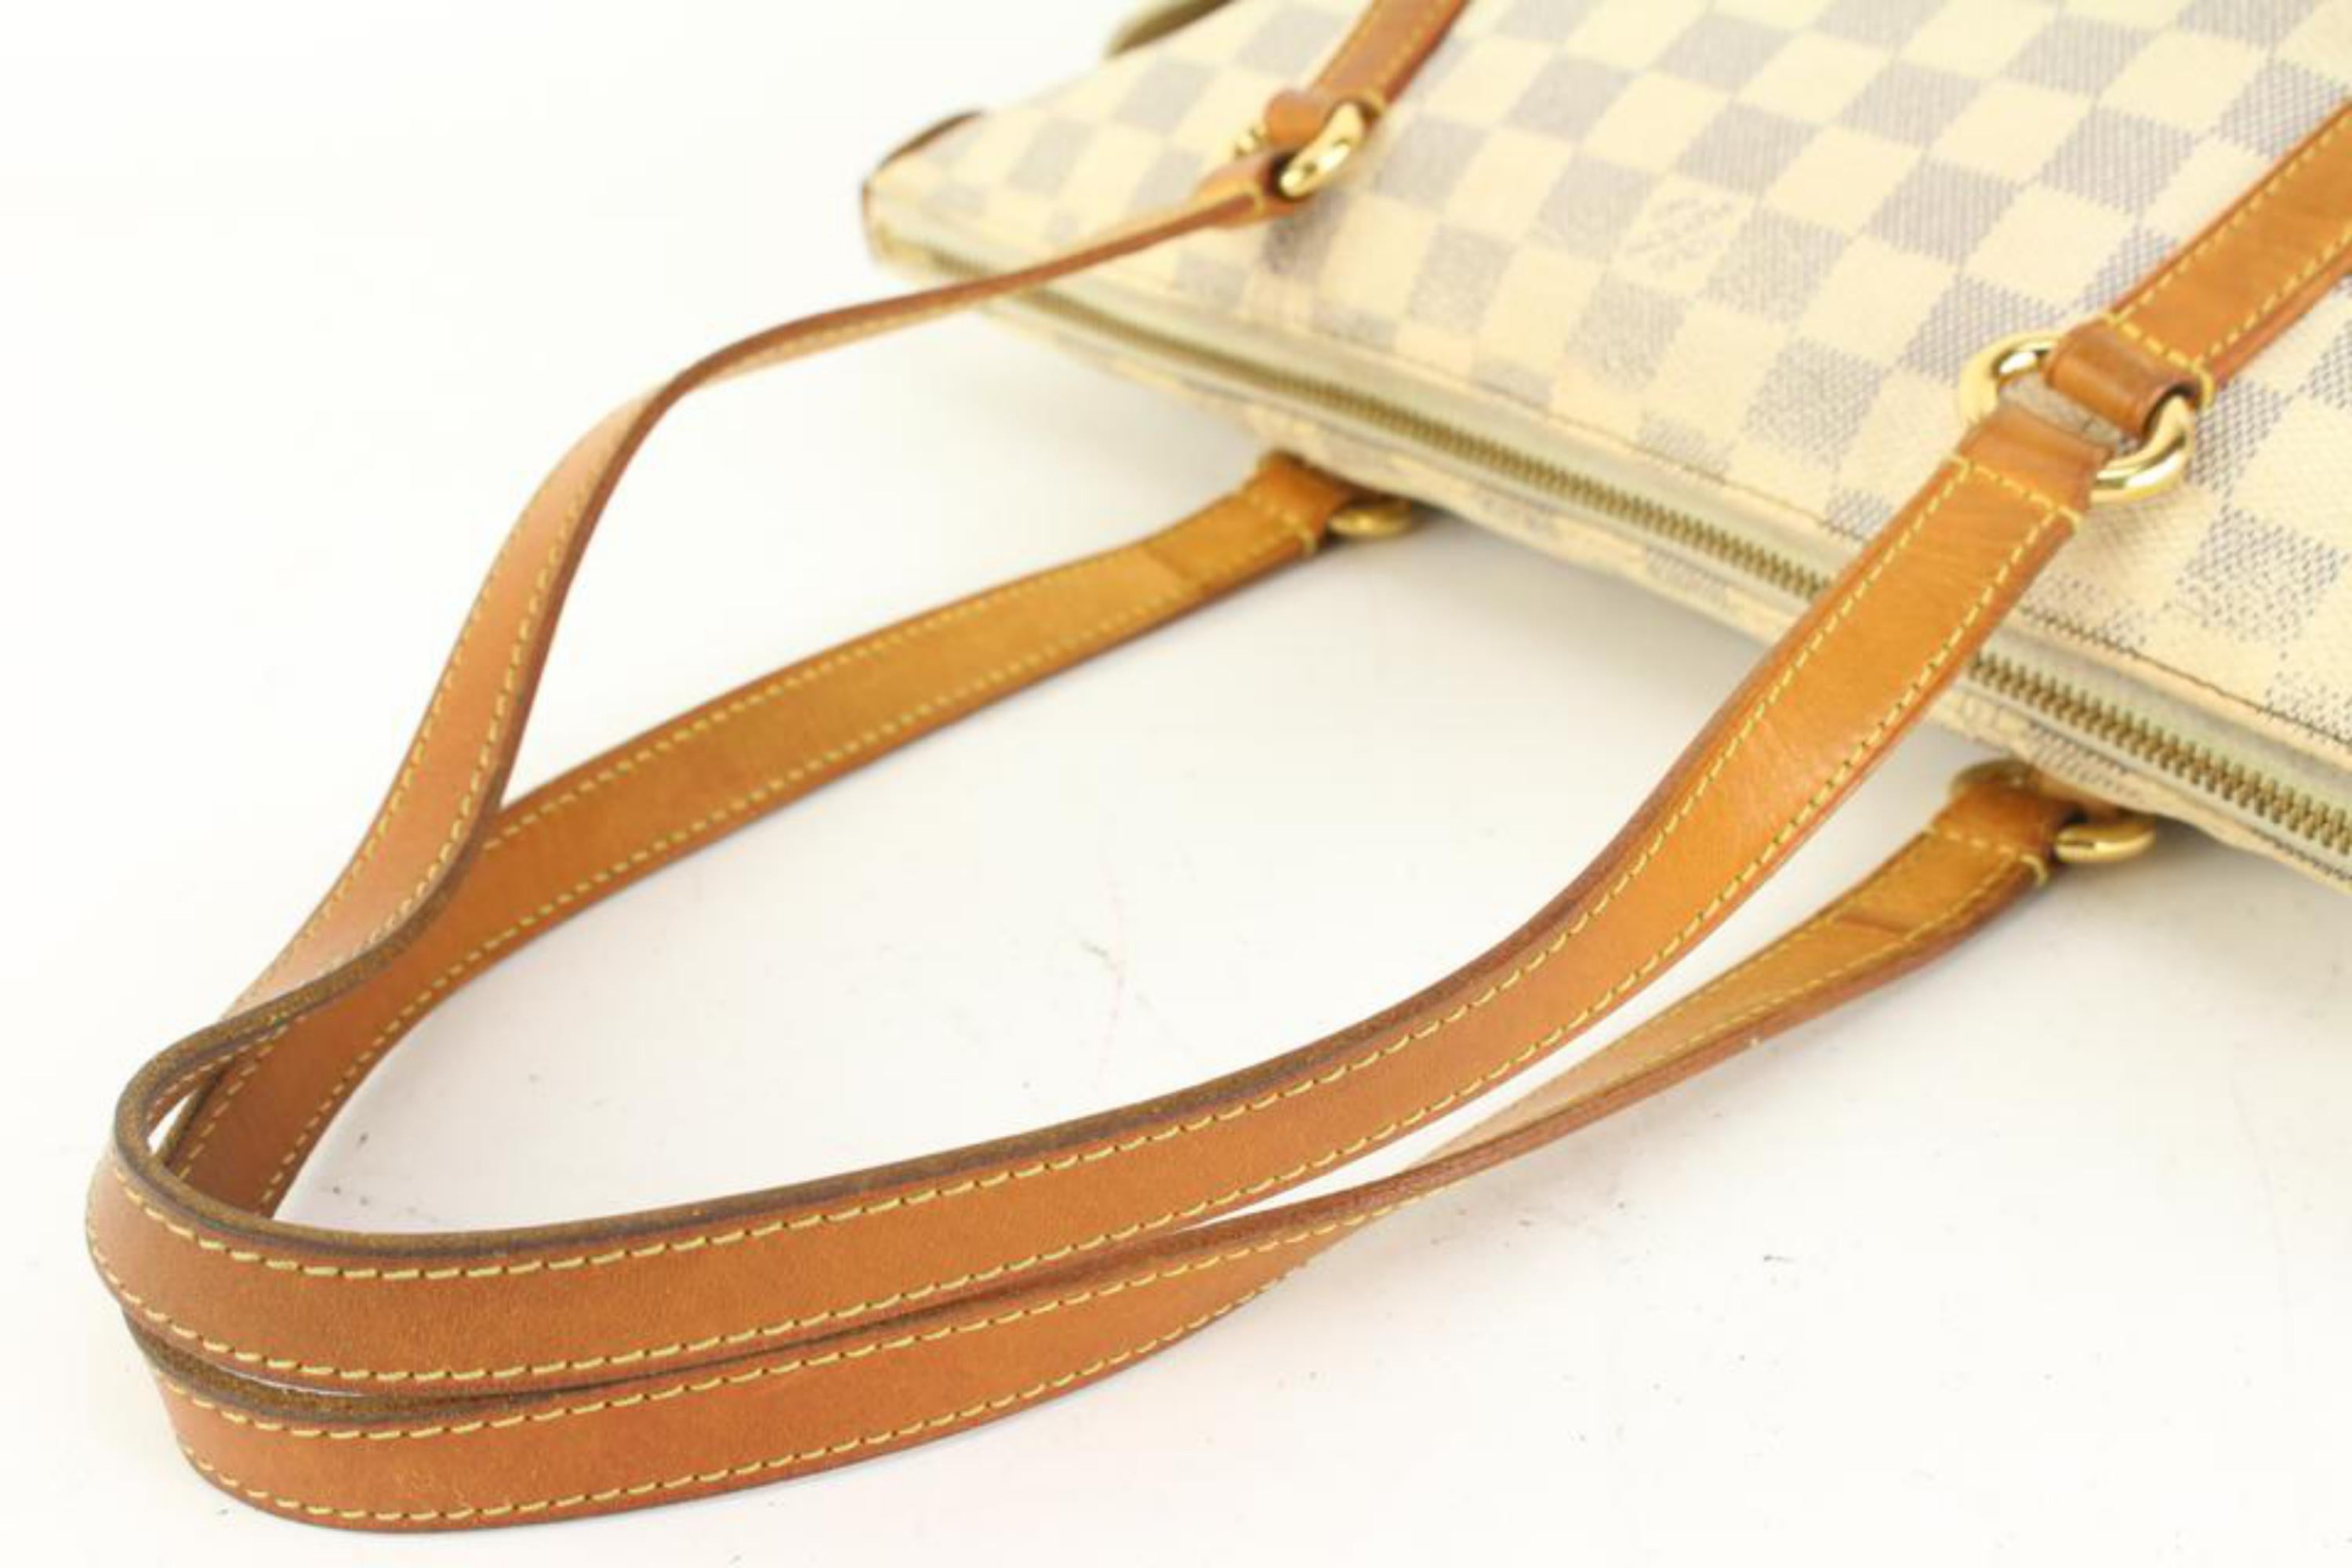 Louis Vuitton Damier Azur Totally PM Tote Bag 83lk67s In Fair Condition For Sale In Dix hills, NY